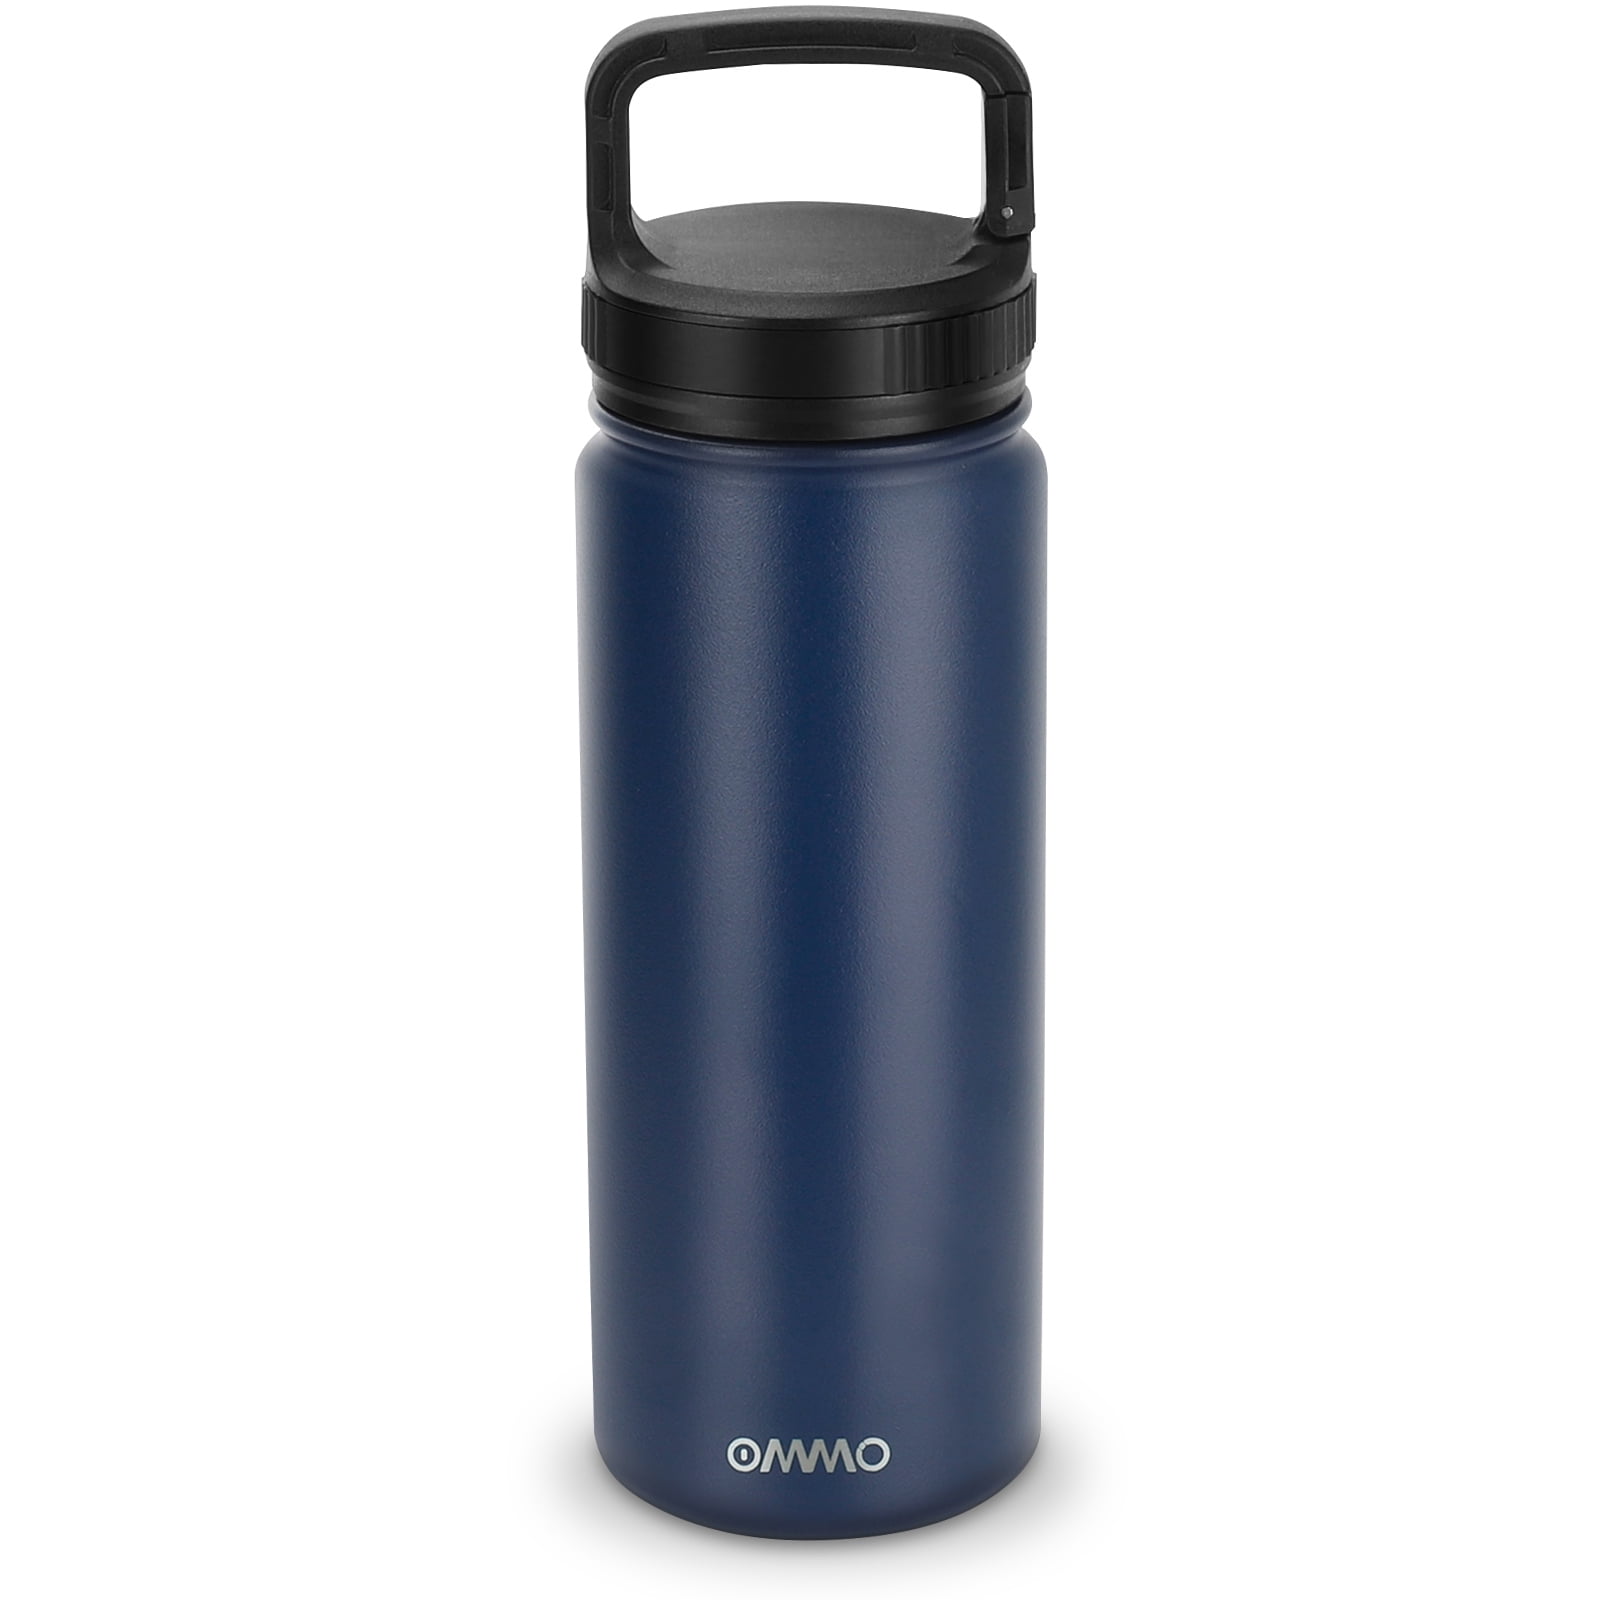 Bright Silver Quatii Stainless Steel Vacuum Insulated Water Bottles Sweat Free Flask with Leak Proof Lid Thermos Keeps Hot and Cold Travel Coffee Mug 17 oz